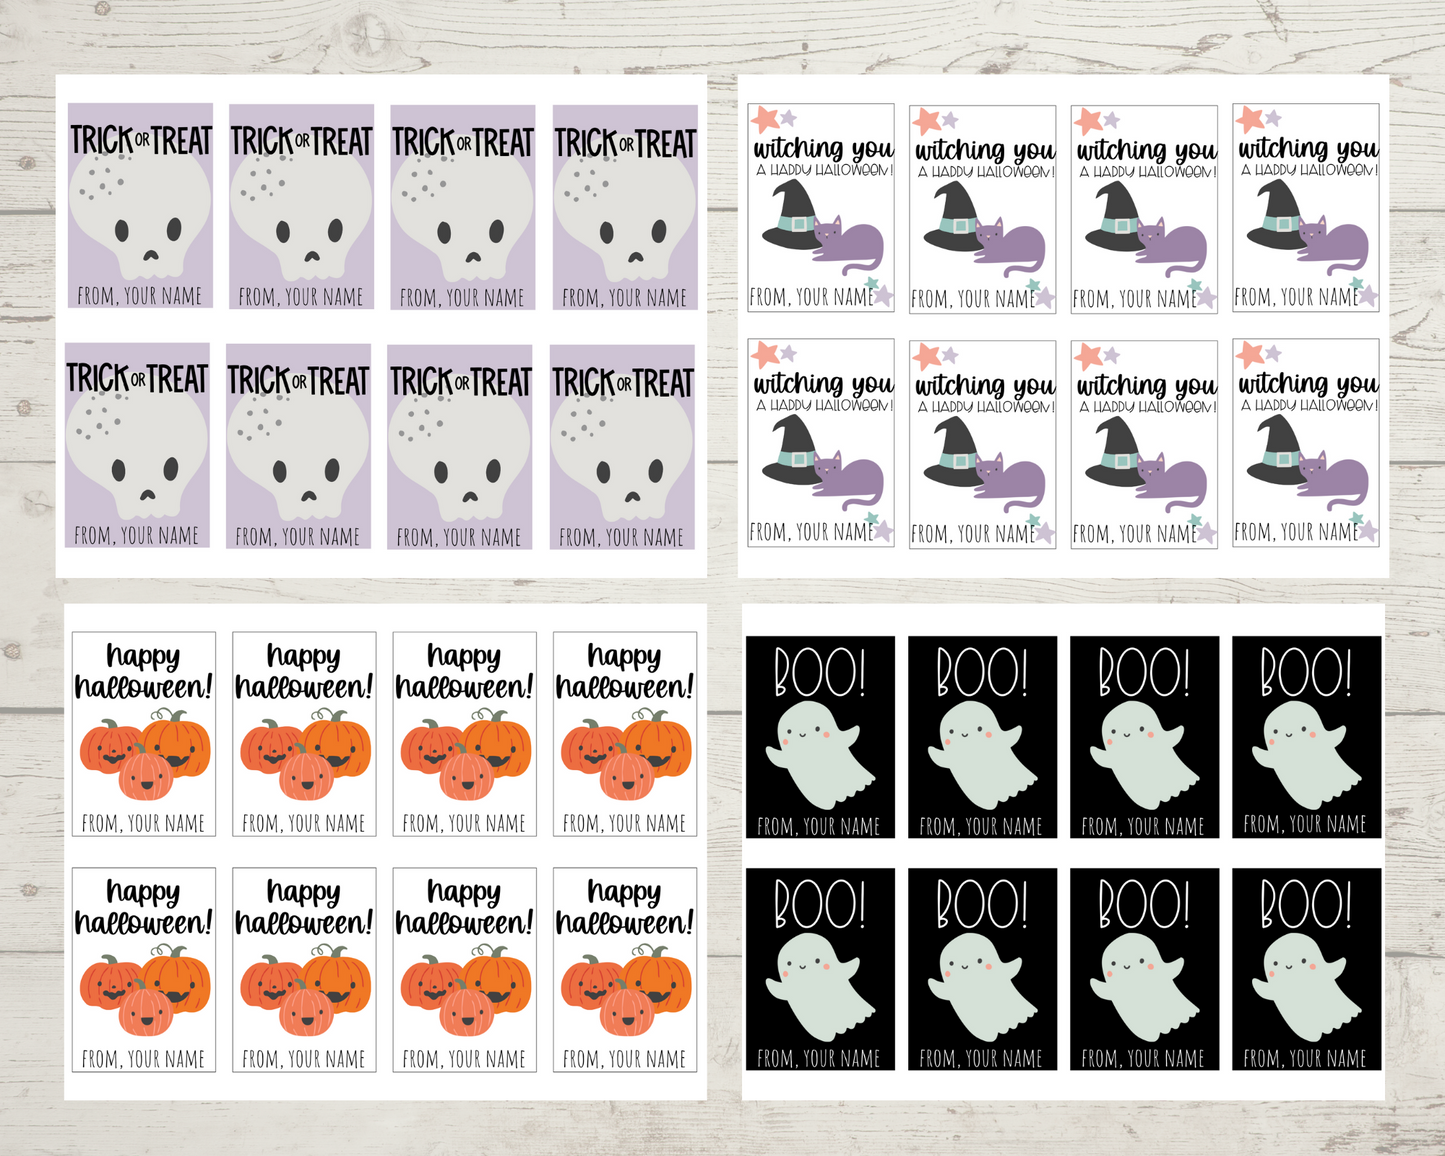 All four PDF pages displayed with the four gift tags designs as they would look when first printed. 8 tags on each page.